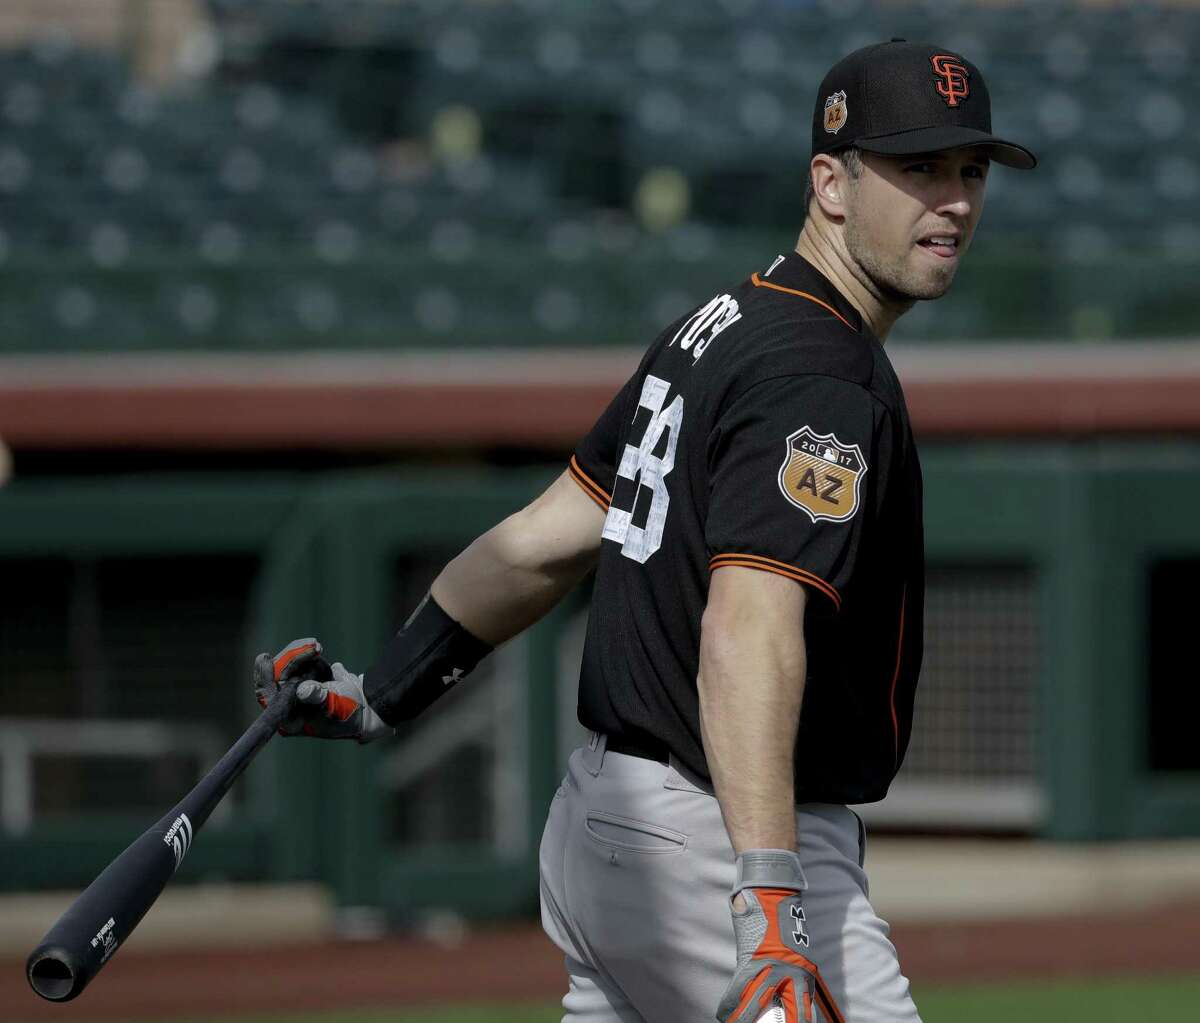 Buster Posey at 30 Giants’ leader on his path, team’s future and a big